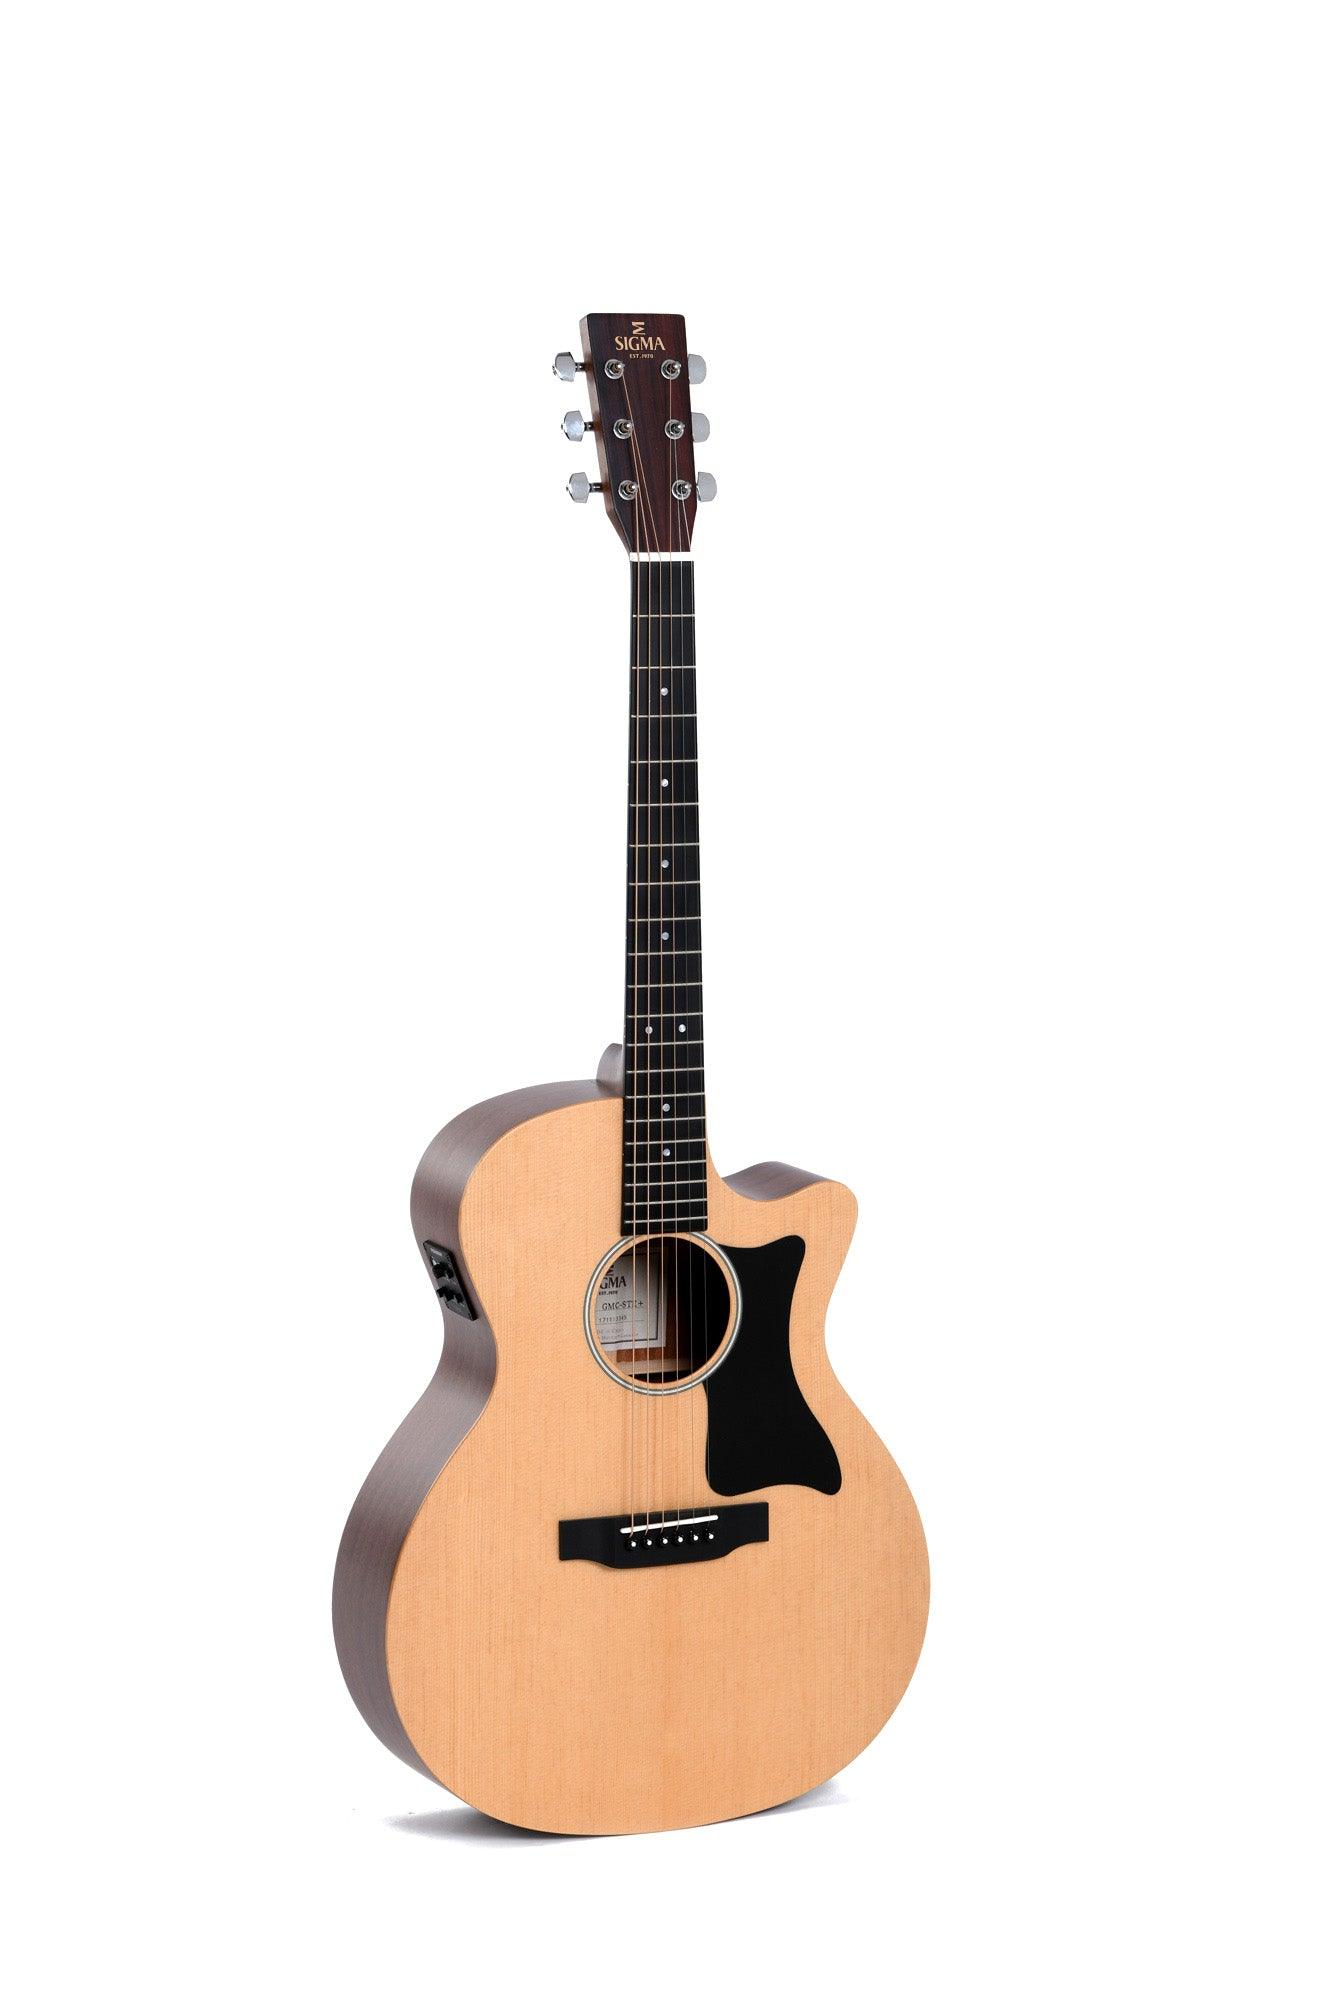 SE Grand OM Spruce/Mahogany w/ Pickup - Guitars - Acoustic by Sigma at Muso's Stuff